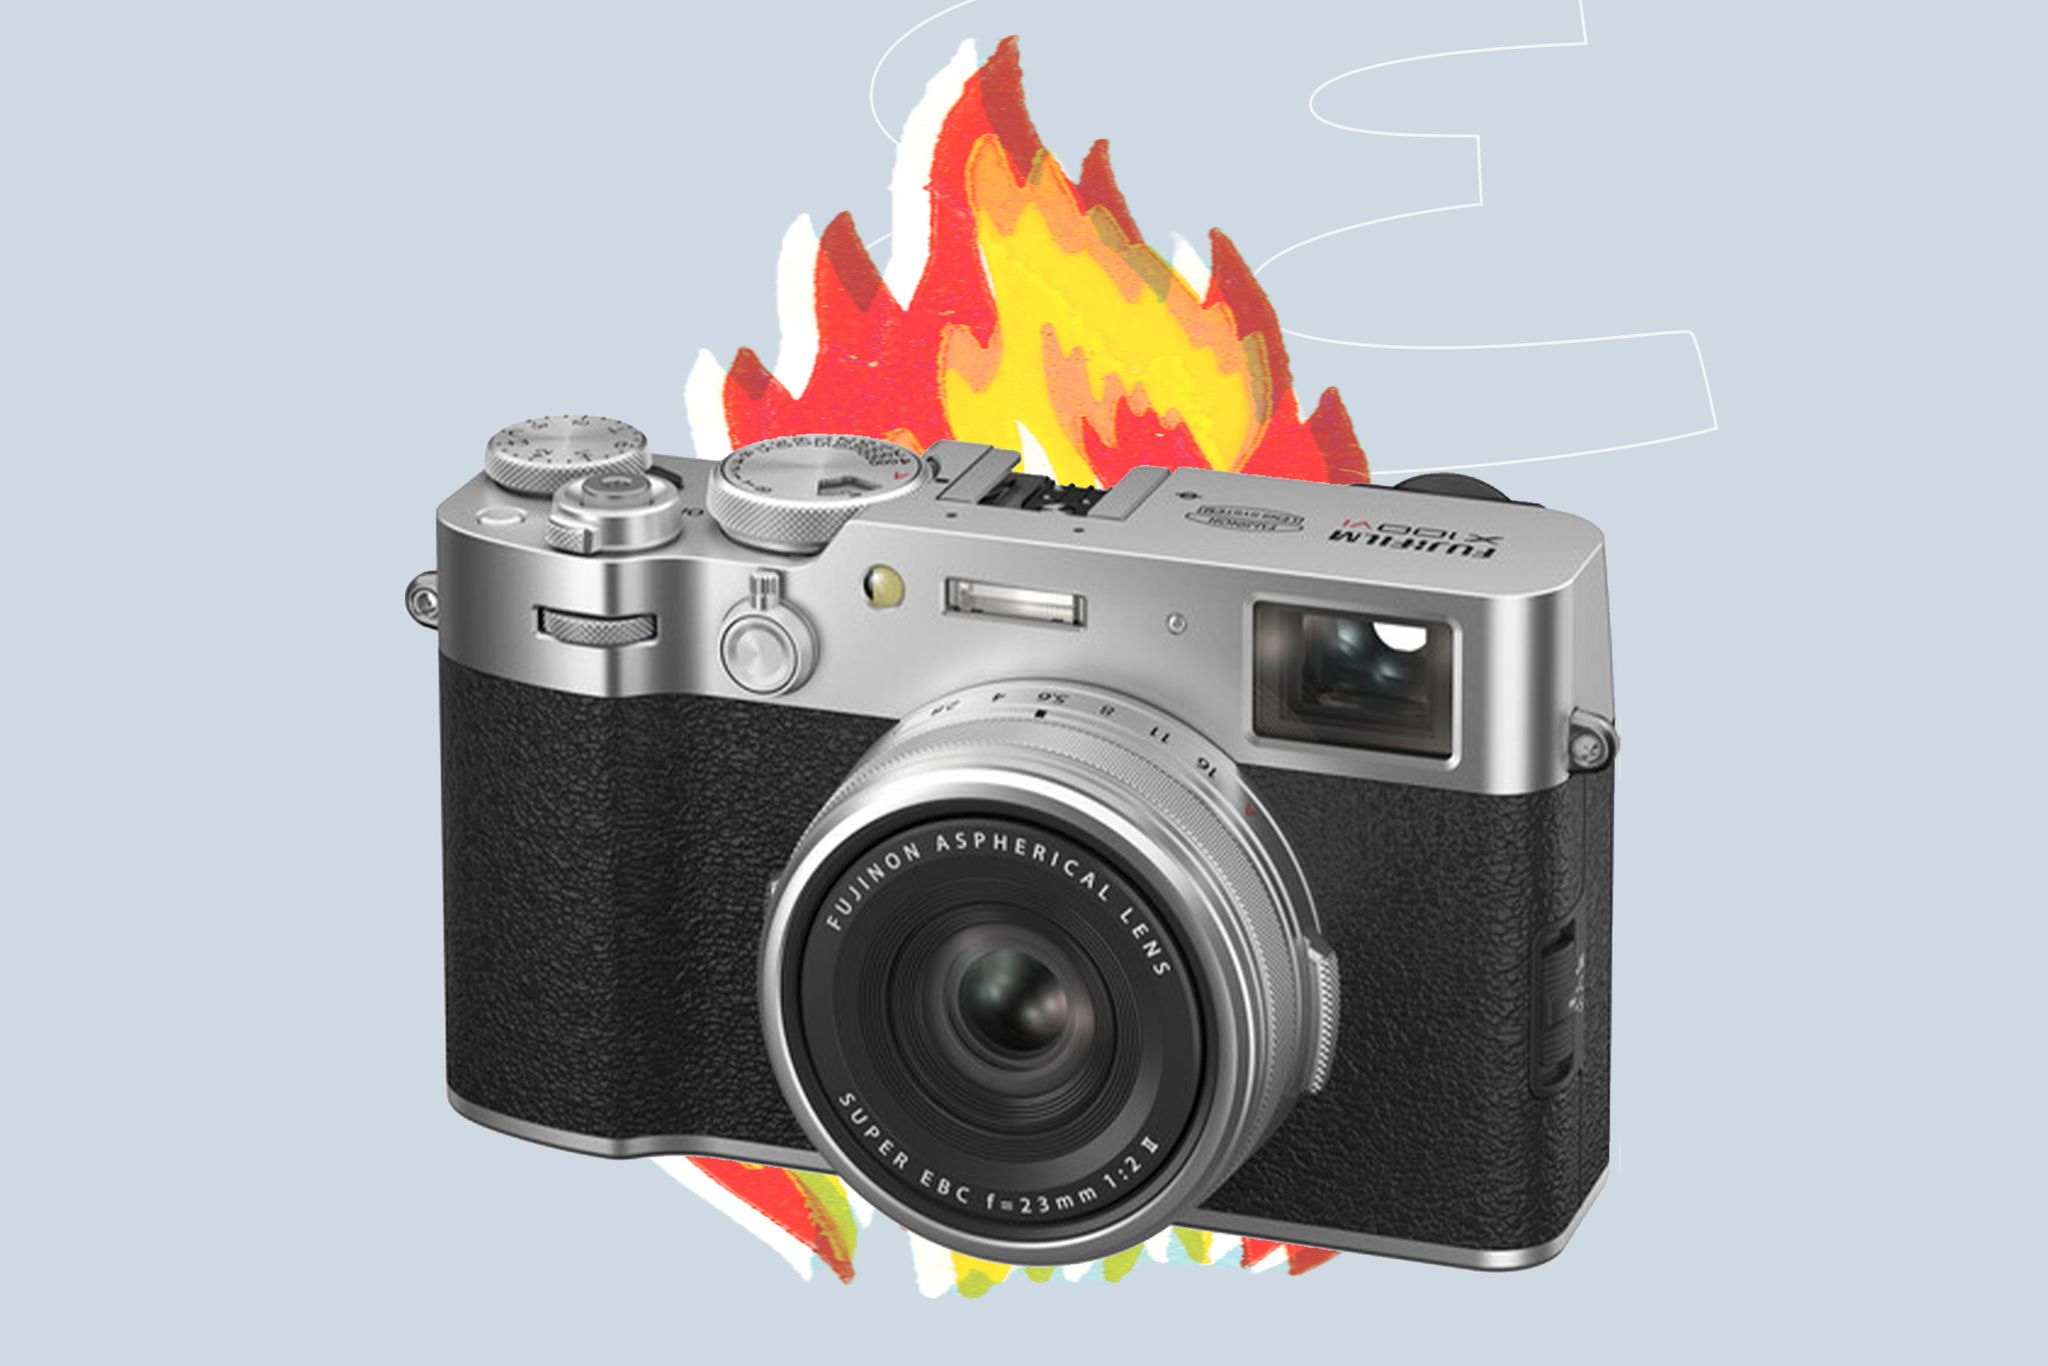 a camera with a flame